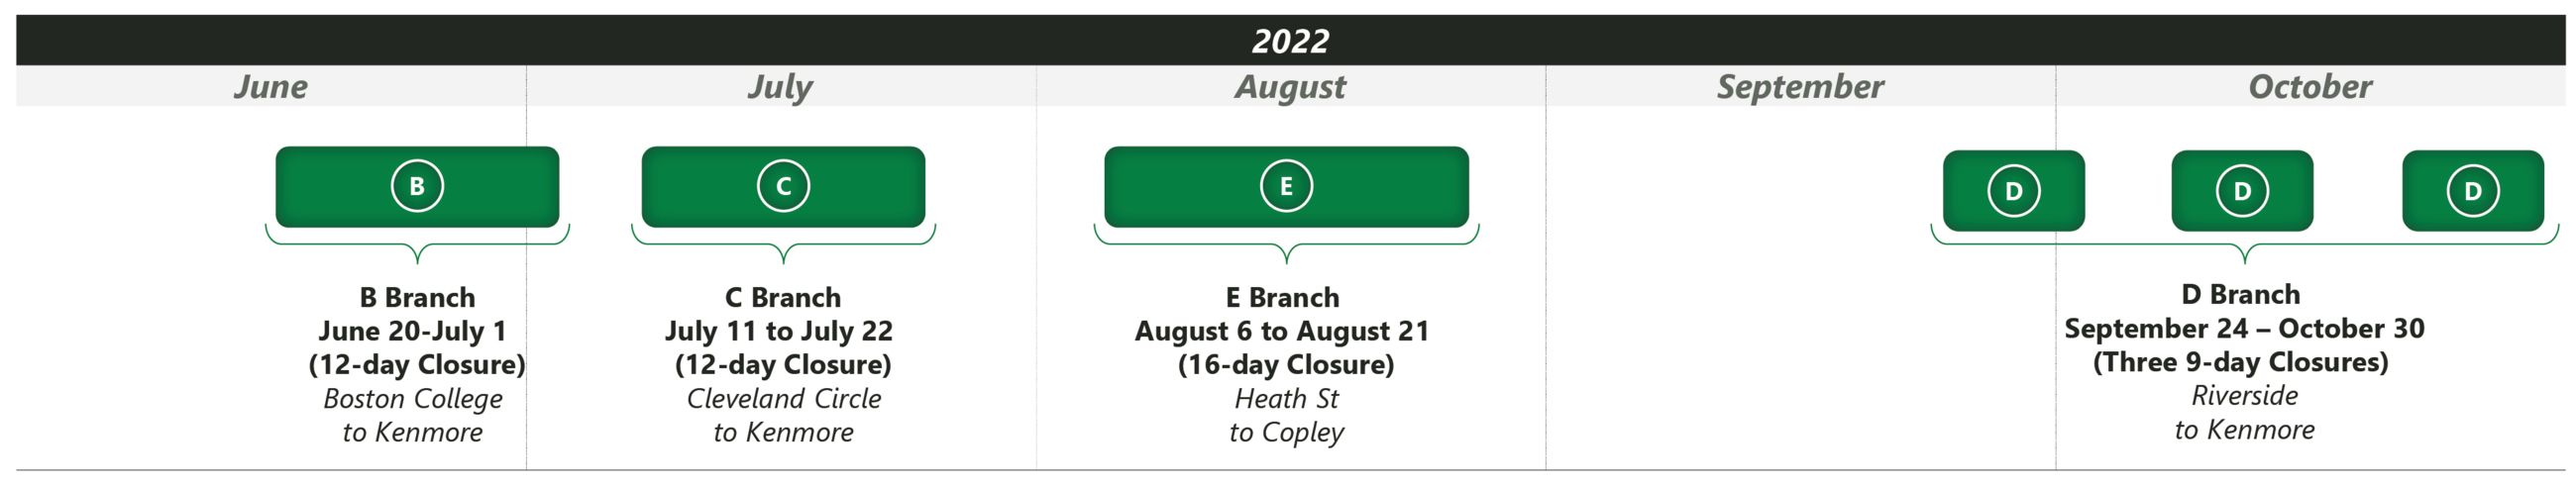 The Green Line Transformation 2022 construction schedule. B Branch June 20 to July 1 12-day closure. Boston College to Kenmore. C Branch July 11 to July 22 12-day closure. Cleveland Circle to Kenmore. E Branch August 6 to August 21 16-day closure. Health Street to Copley. D Branch September 24 to October 30 Three 9-day Closures. Riverside to Kenmore.